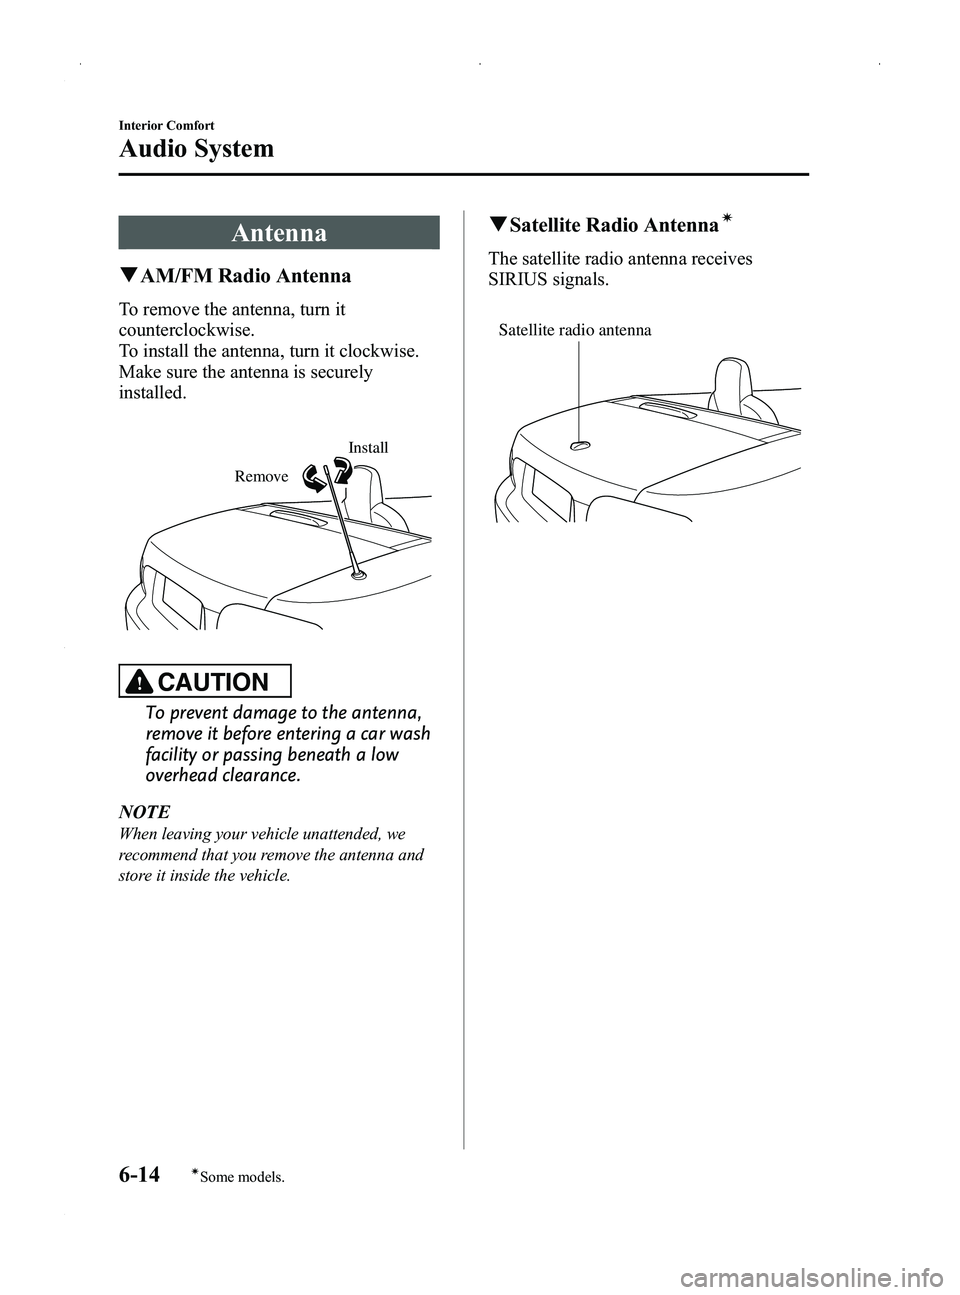 MAZDA MODEL MX-5 MIATA PRHT 2014  Owners Manual Black plate (228,1)
Antenna
qAM/FM Radio Antenna
To remove the antenna, turn it
counterclockwise.
To install the antenna, turn it clockwise.
Make sure the antenna is securely
installed.
Remove
Install